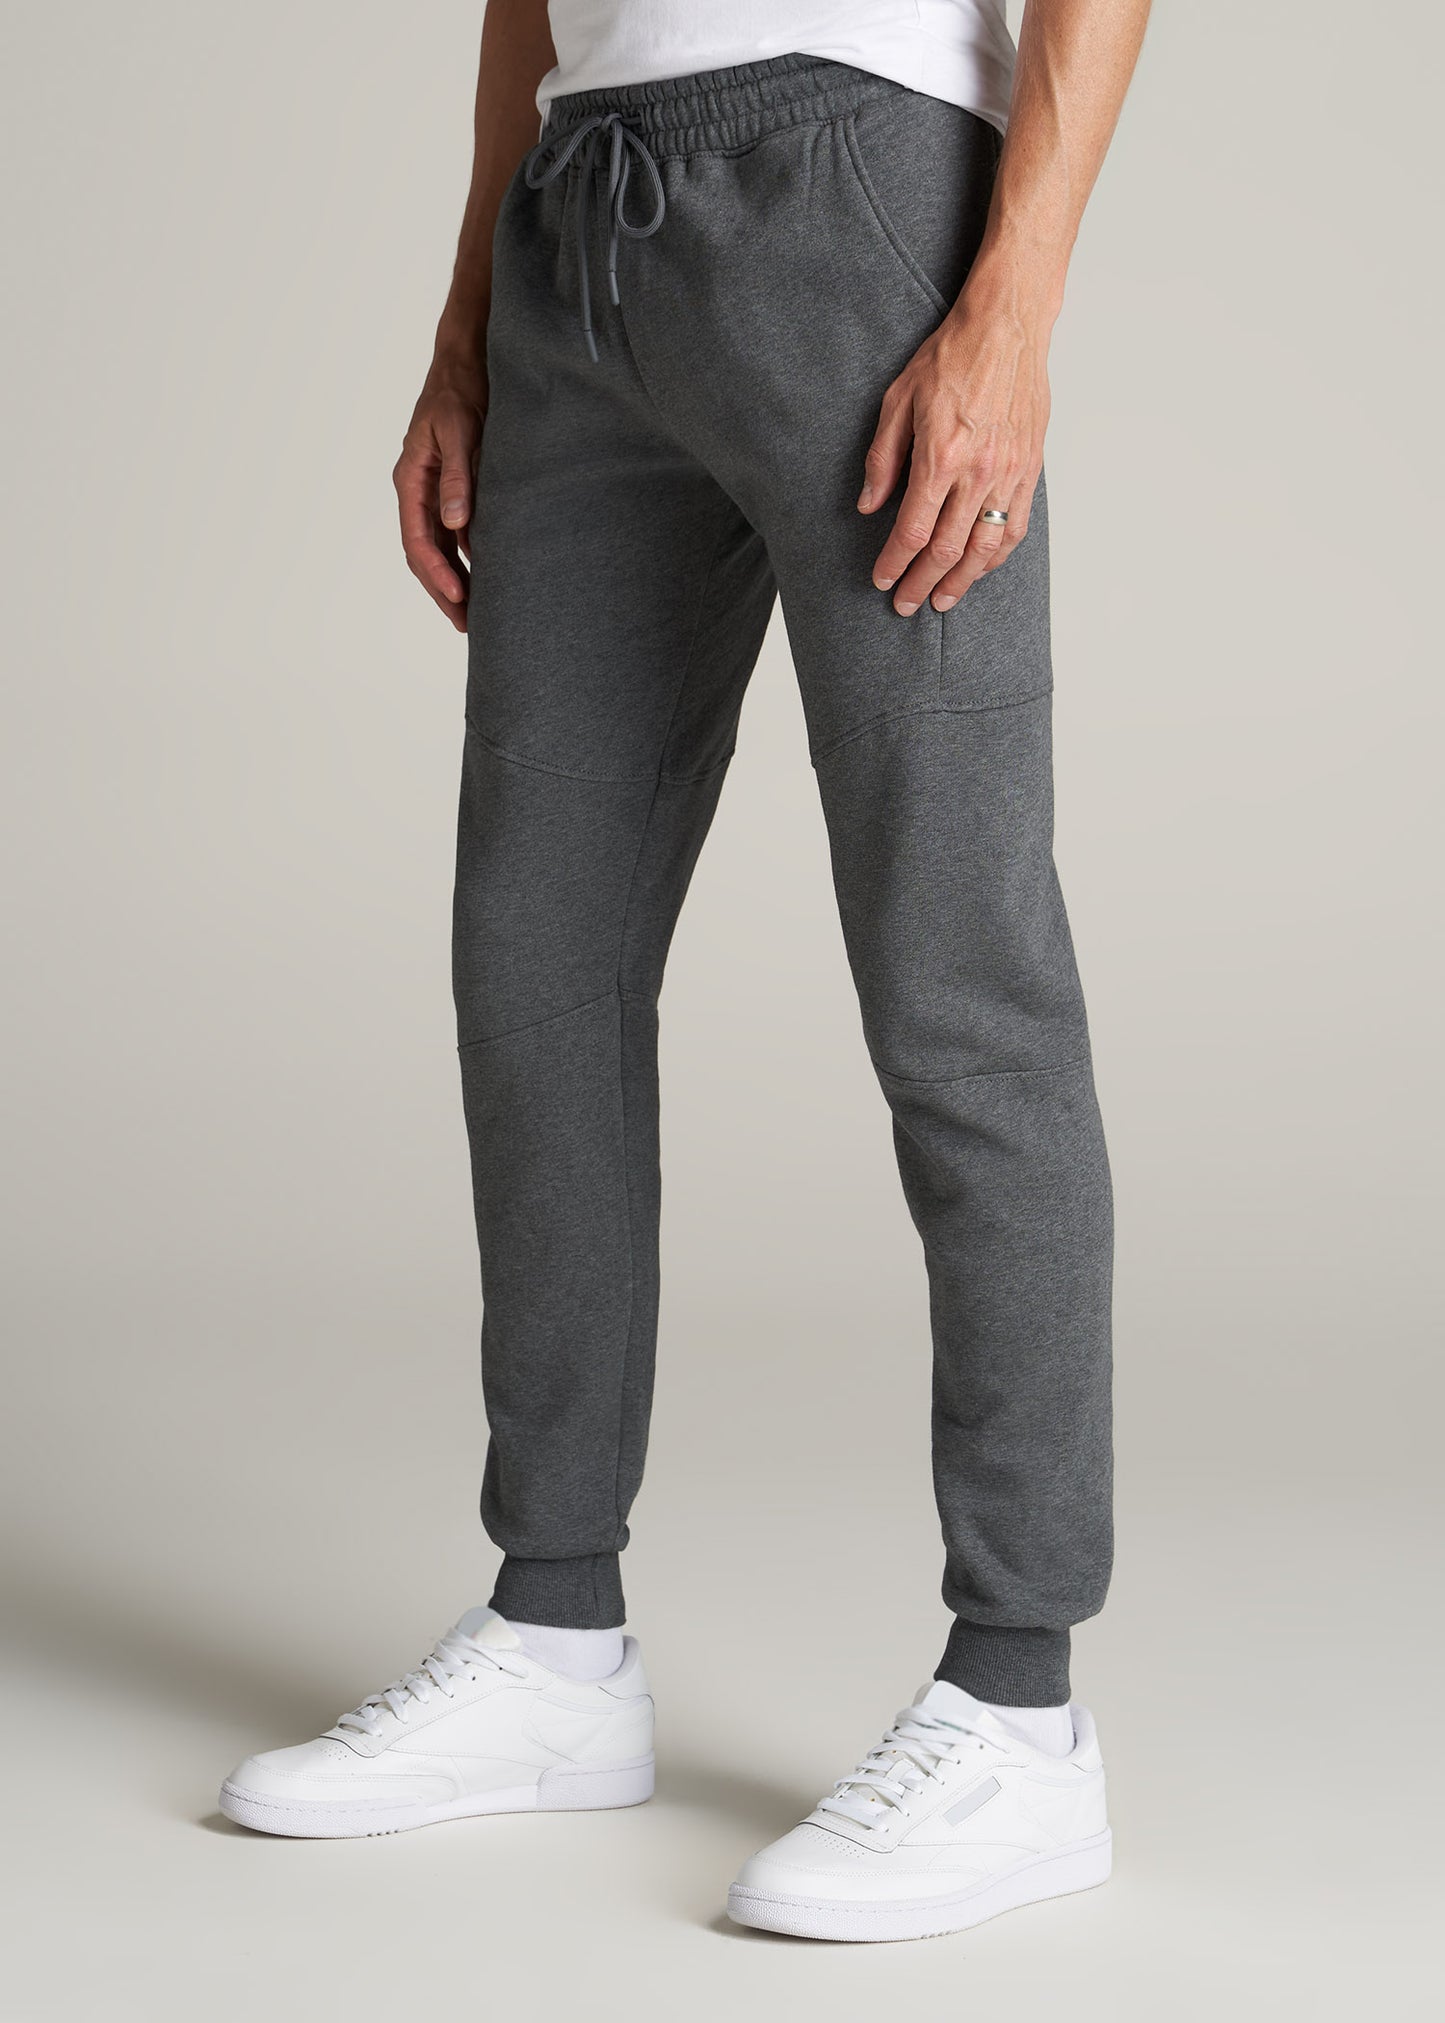 Wearever Fleece Joggers for Tall Men in Charcoal Mix